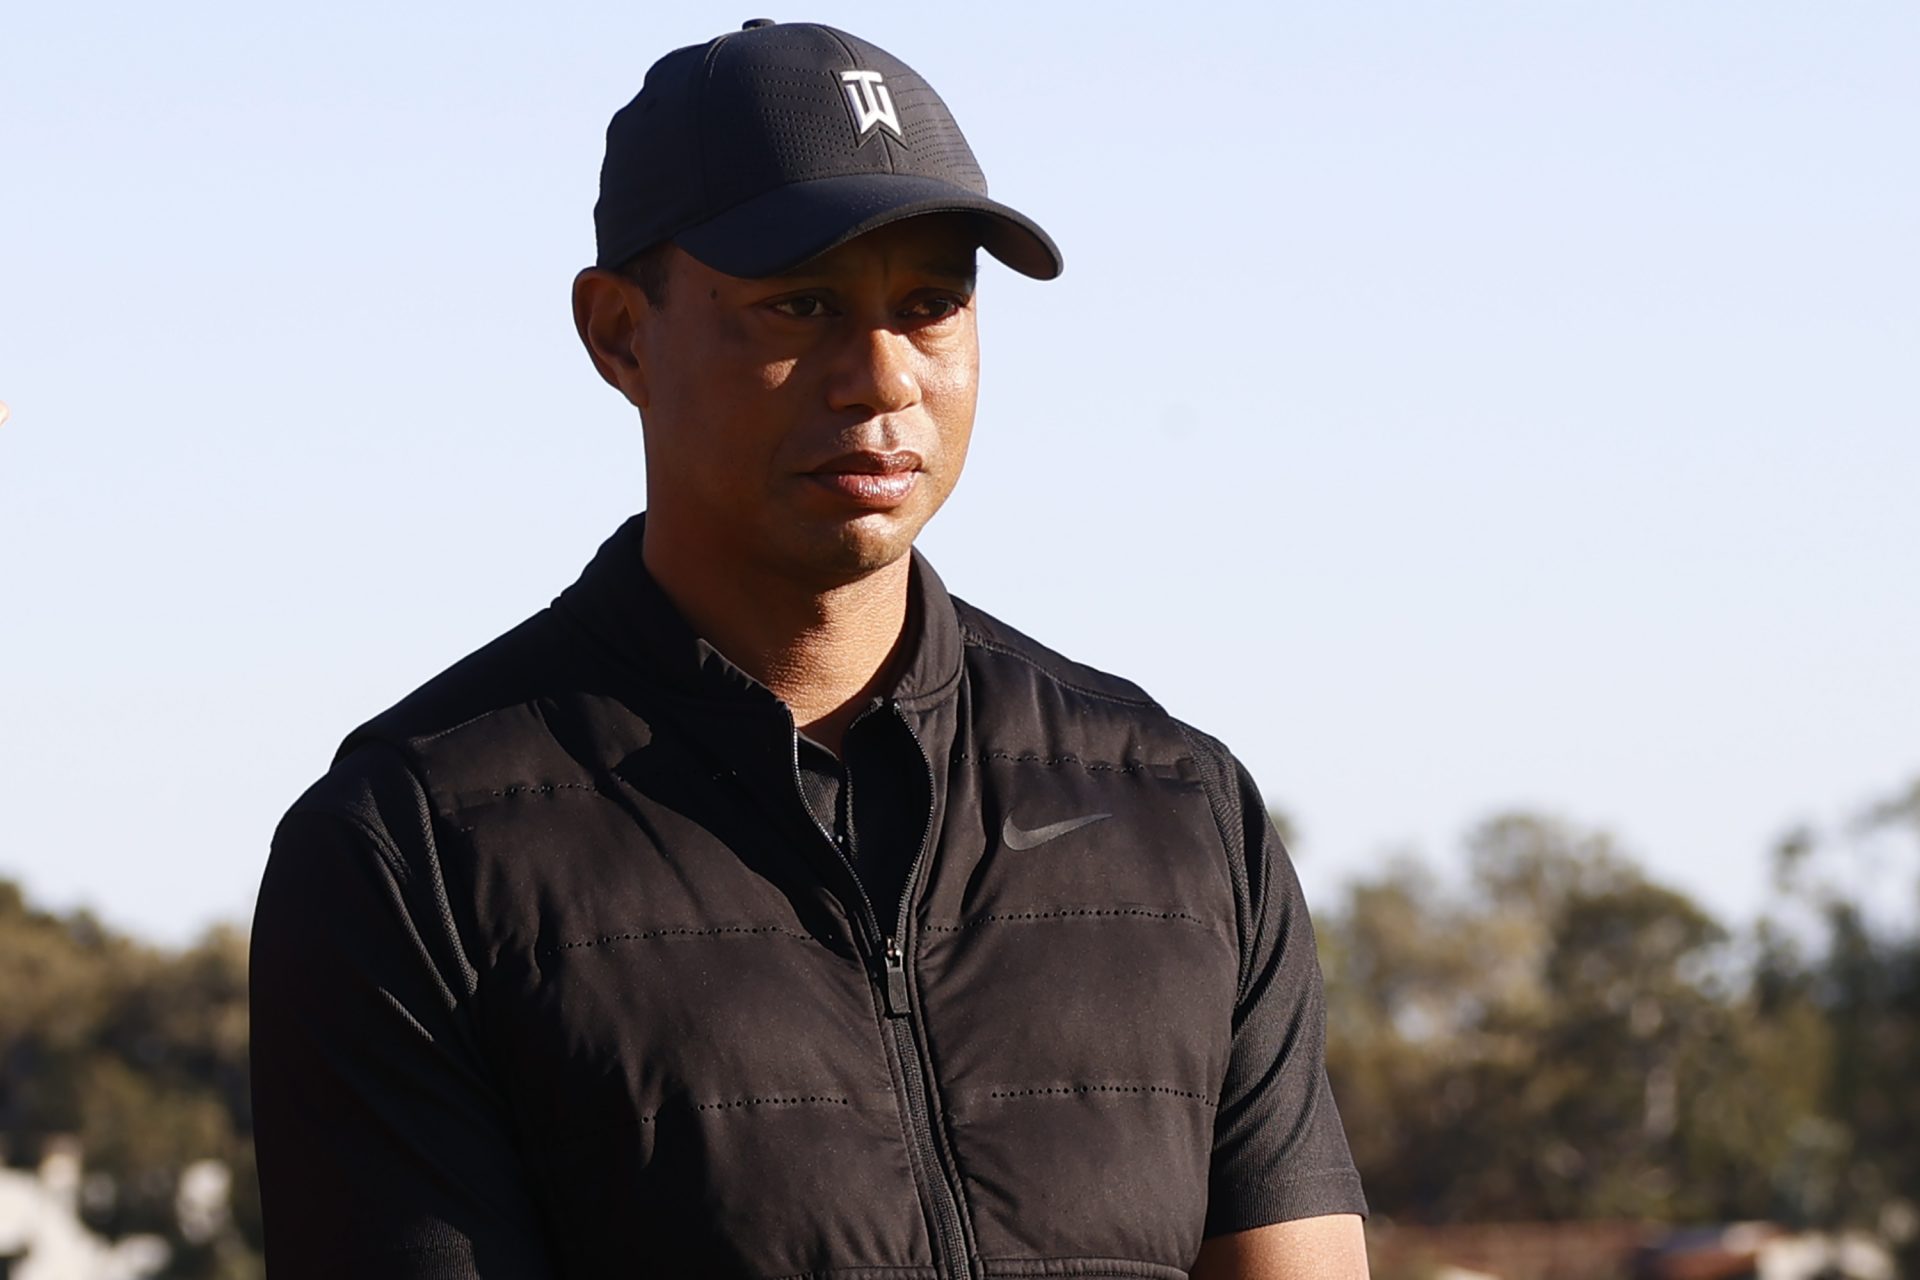 Mandatory Credit: Photo by Ryan Kang/AP/Shutterstock (11773177h)Tiger Woods looks on during the trophy ceremony on the practice green after the final round of the Genesis Invitational golf tournament at Riviera Country Club, in the Pacific Palisades area of Los AngelesGenesis Invitational Golf, Los Angeles, United States - 21 Feb 2021.